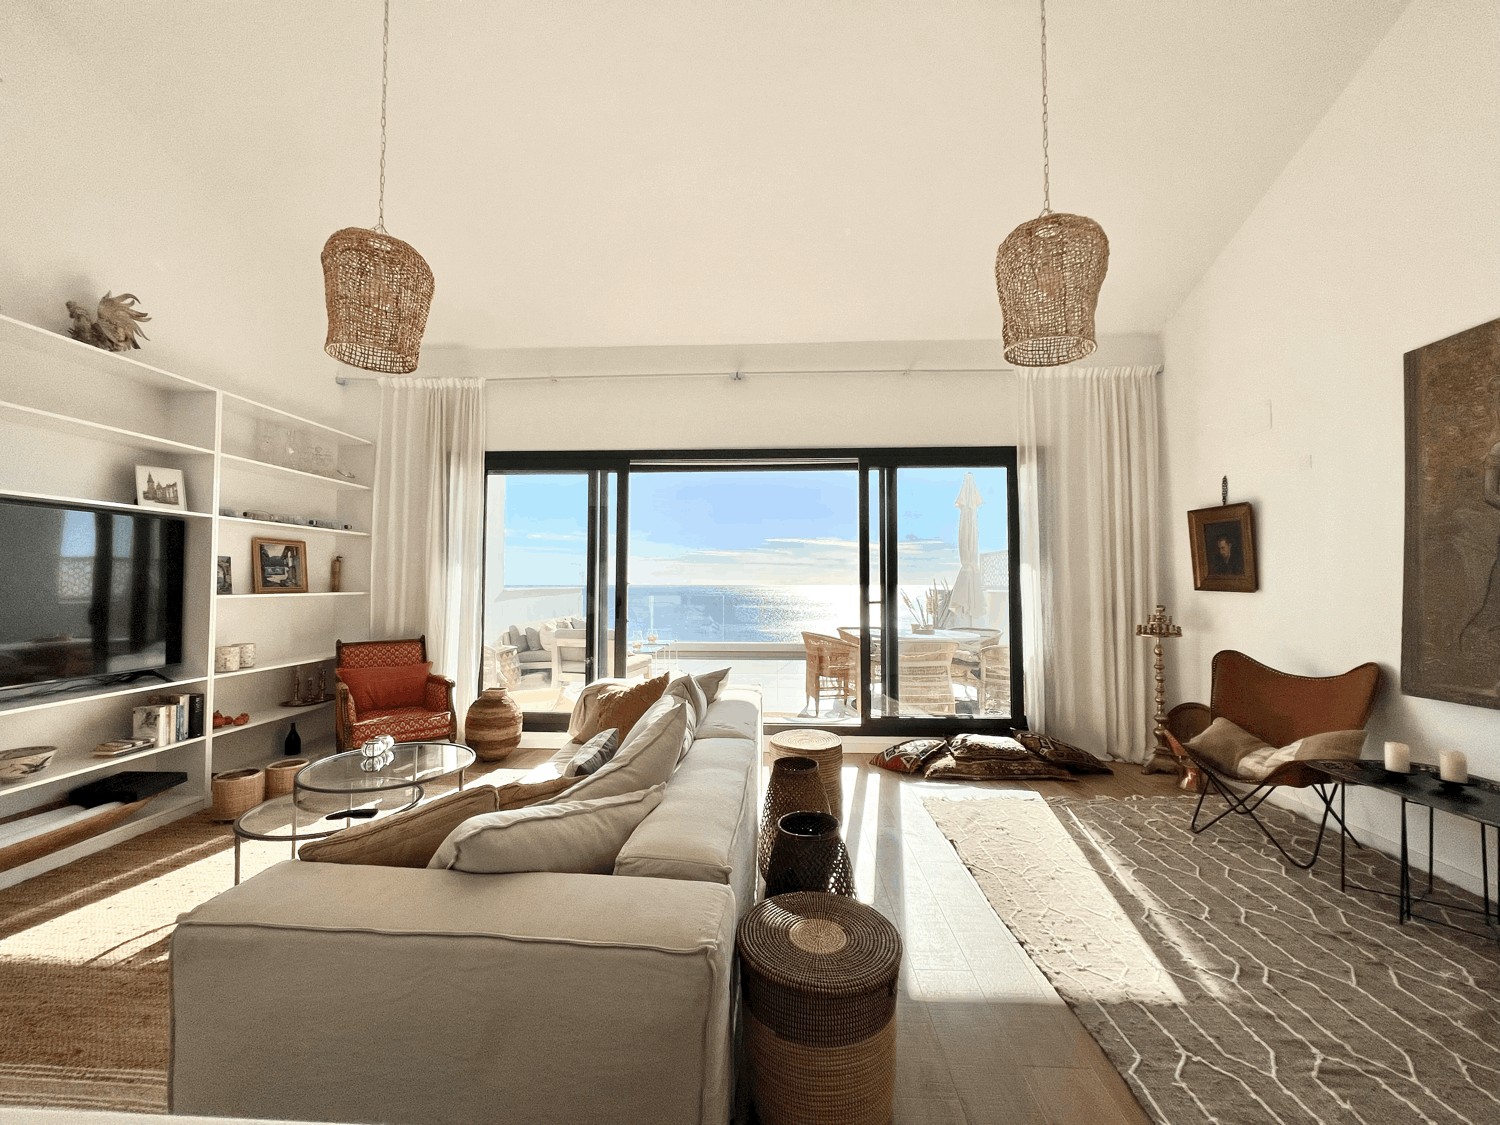 Spectacular penthouse with fabulous panoramic views of the sea, Gibraltar and Faro Carboneras